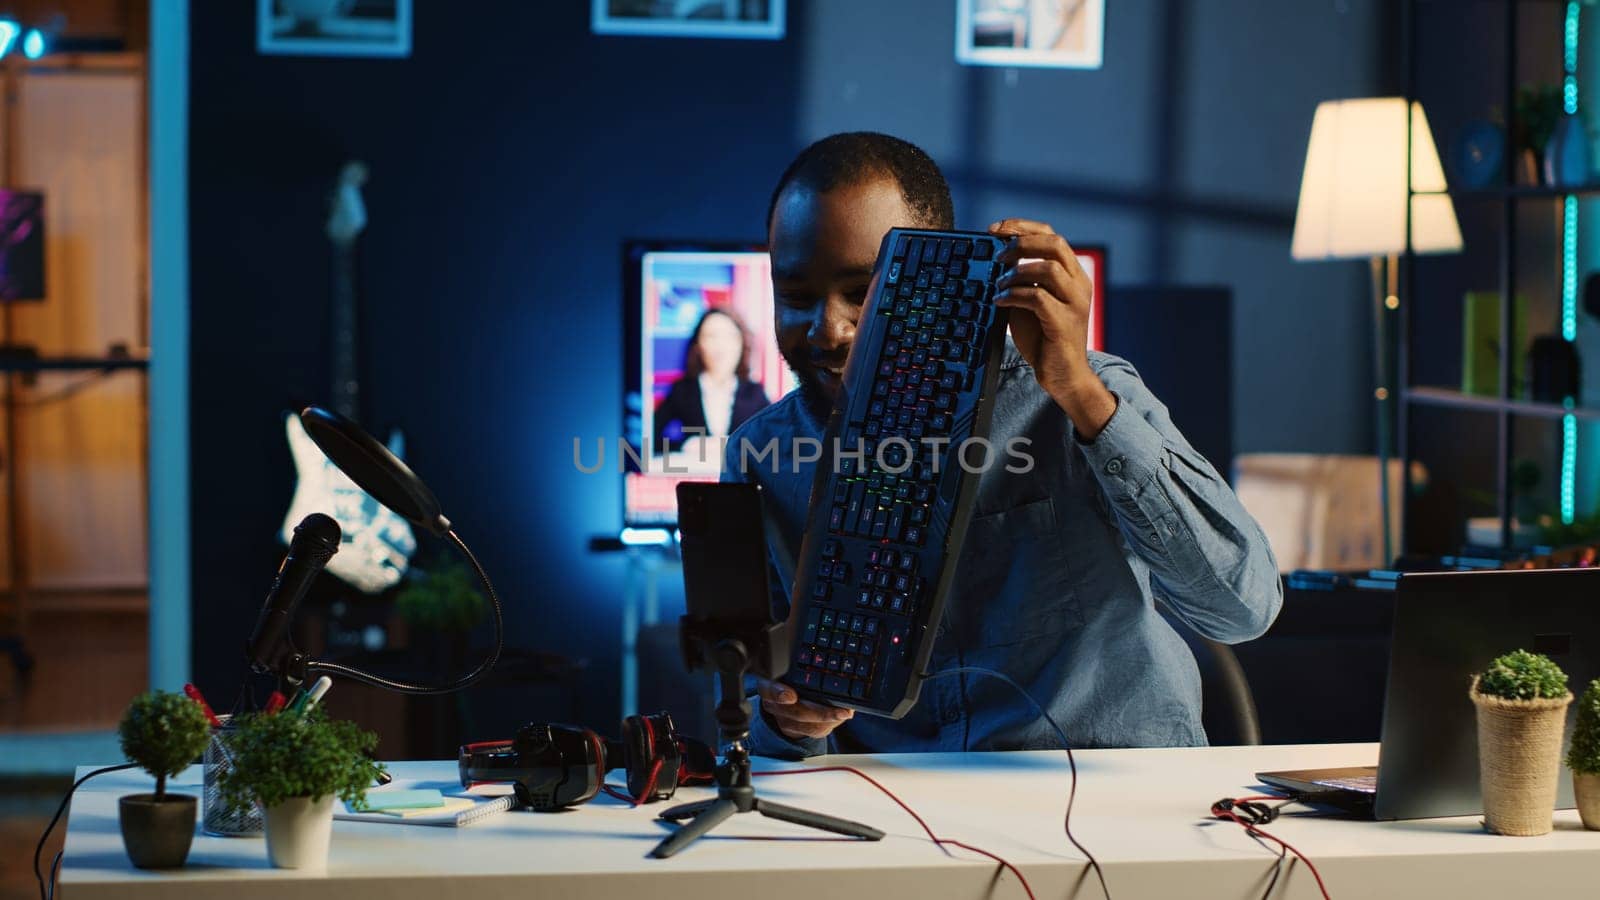 African american technology internet star filming review of newly released USB wired keyboard, mouse and headphones, giving audience feedback about comfort experience, doing endorsement